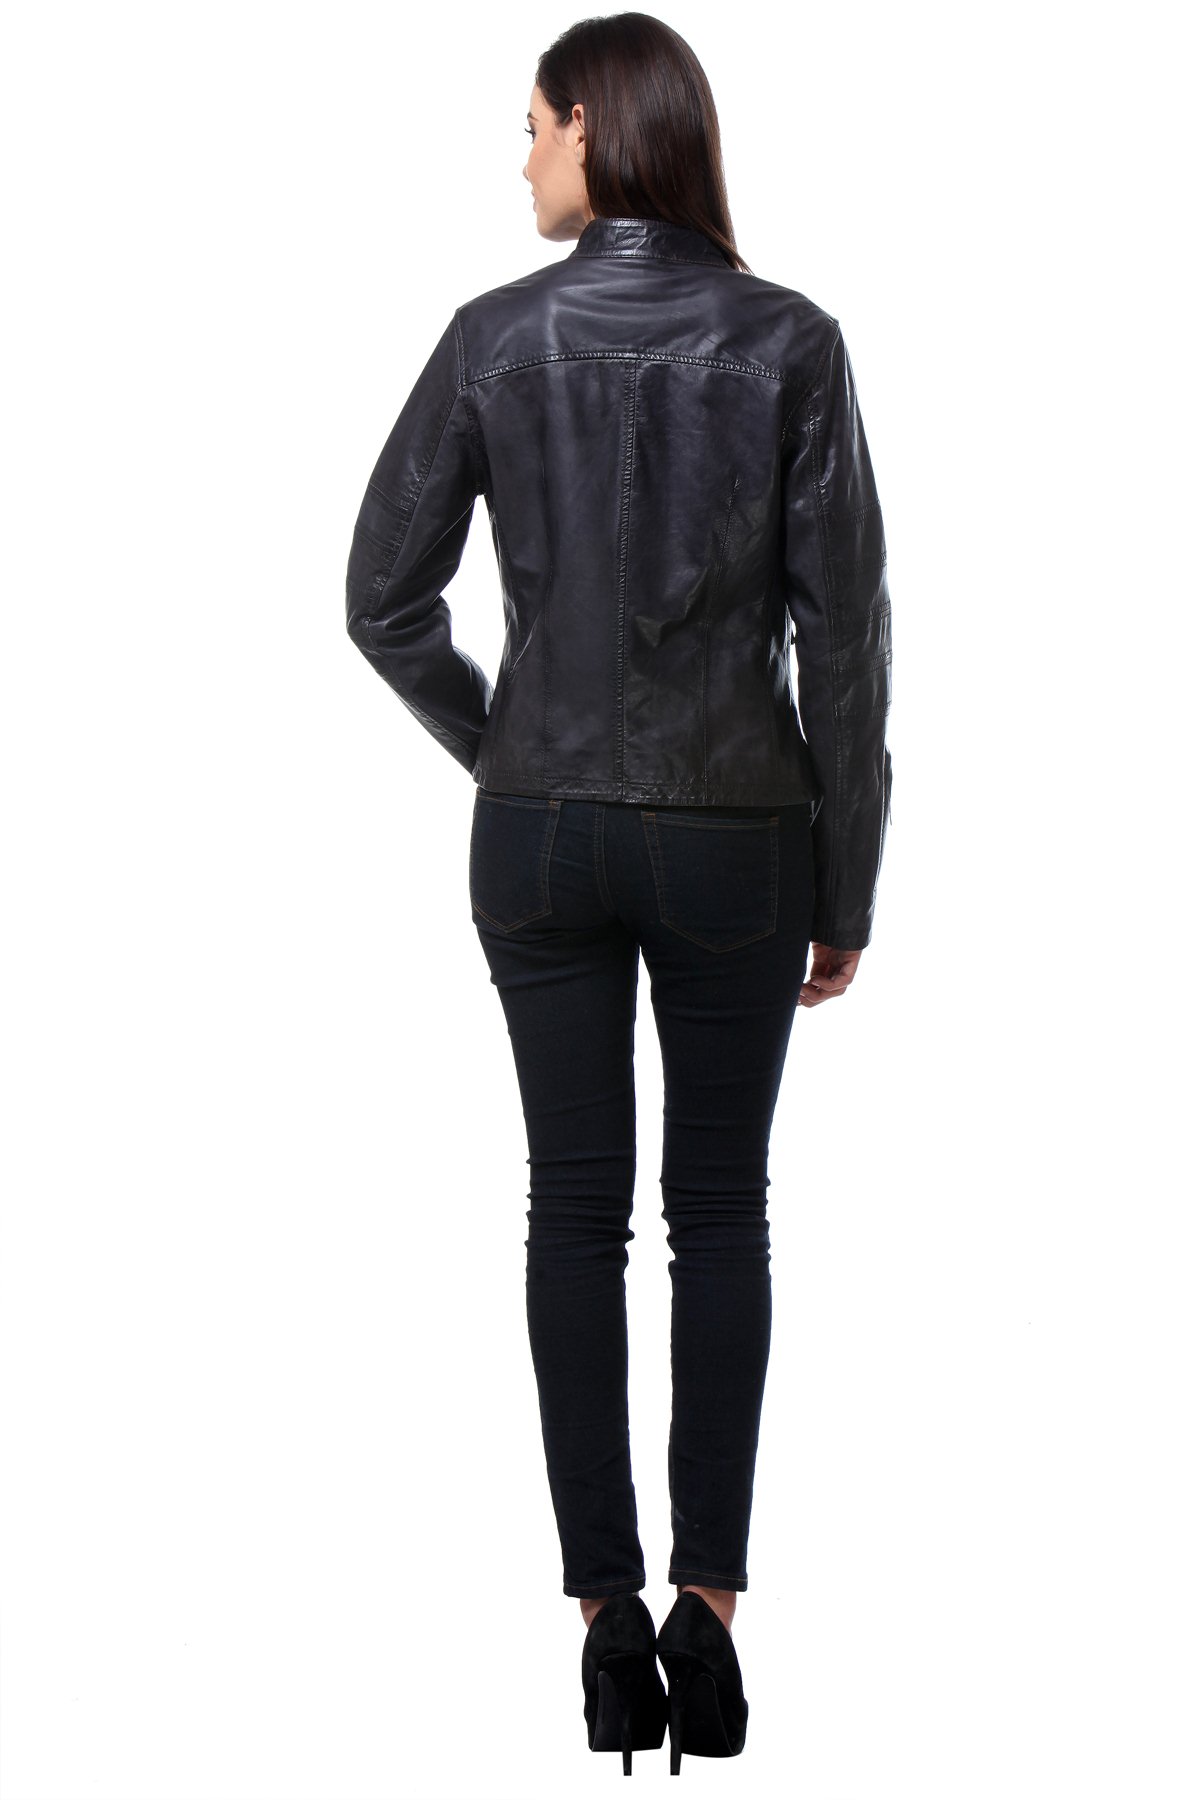 Full Front Zipper (distressed black) - Crowngate Leathers